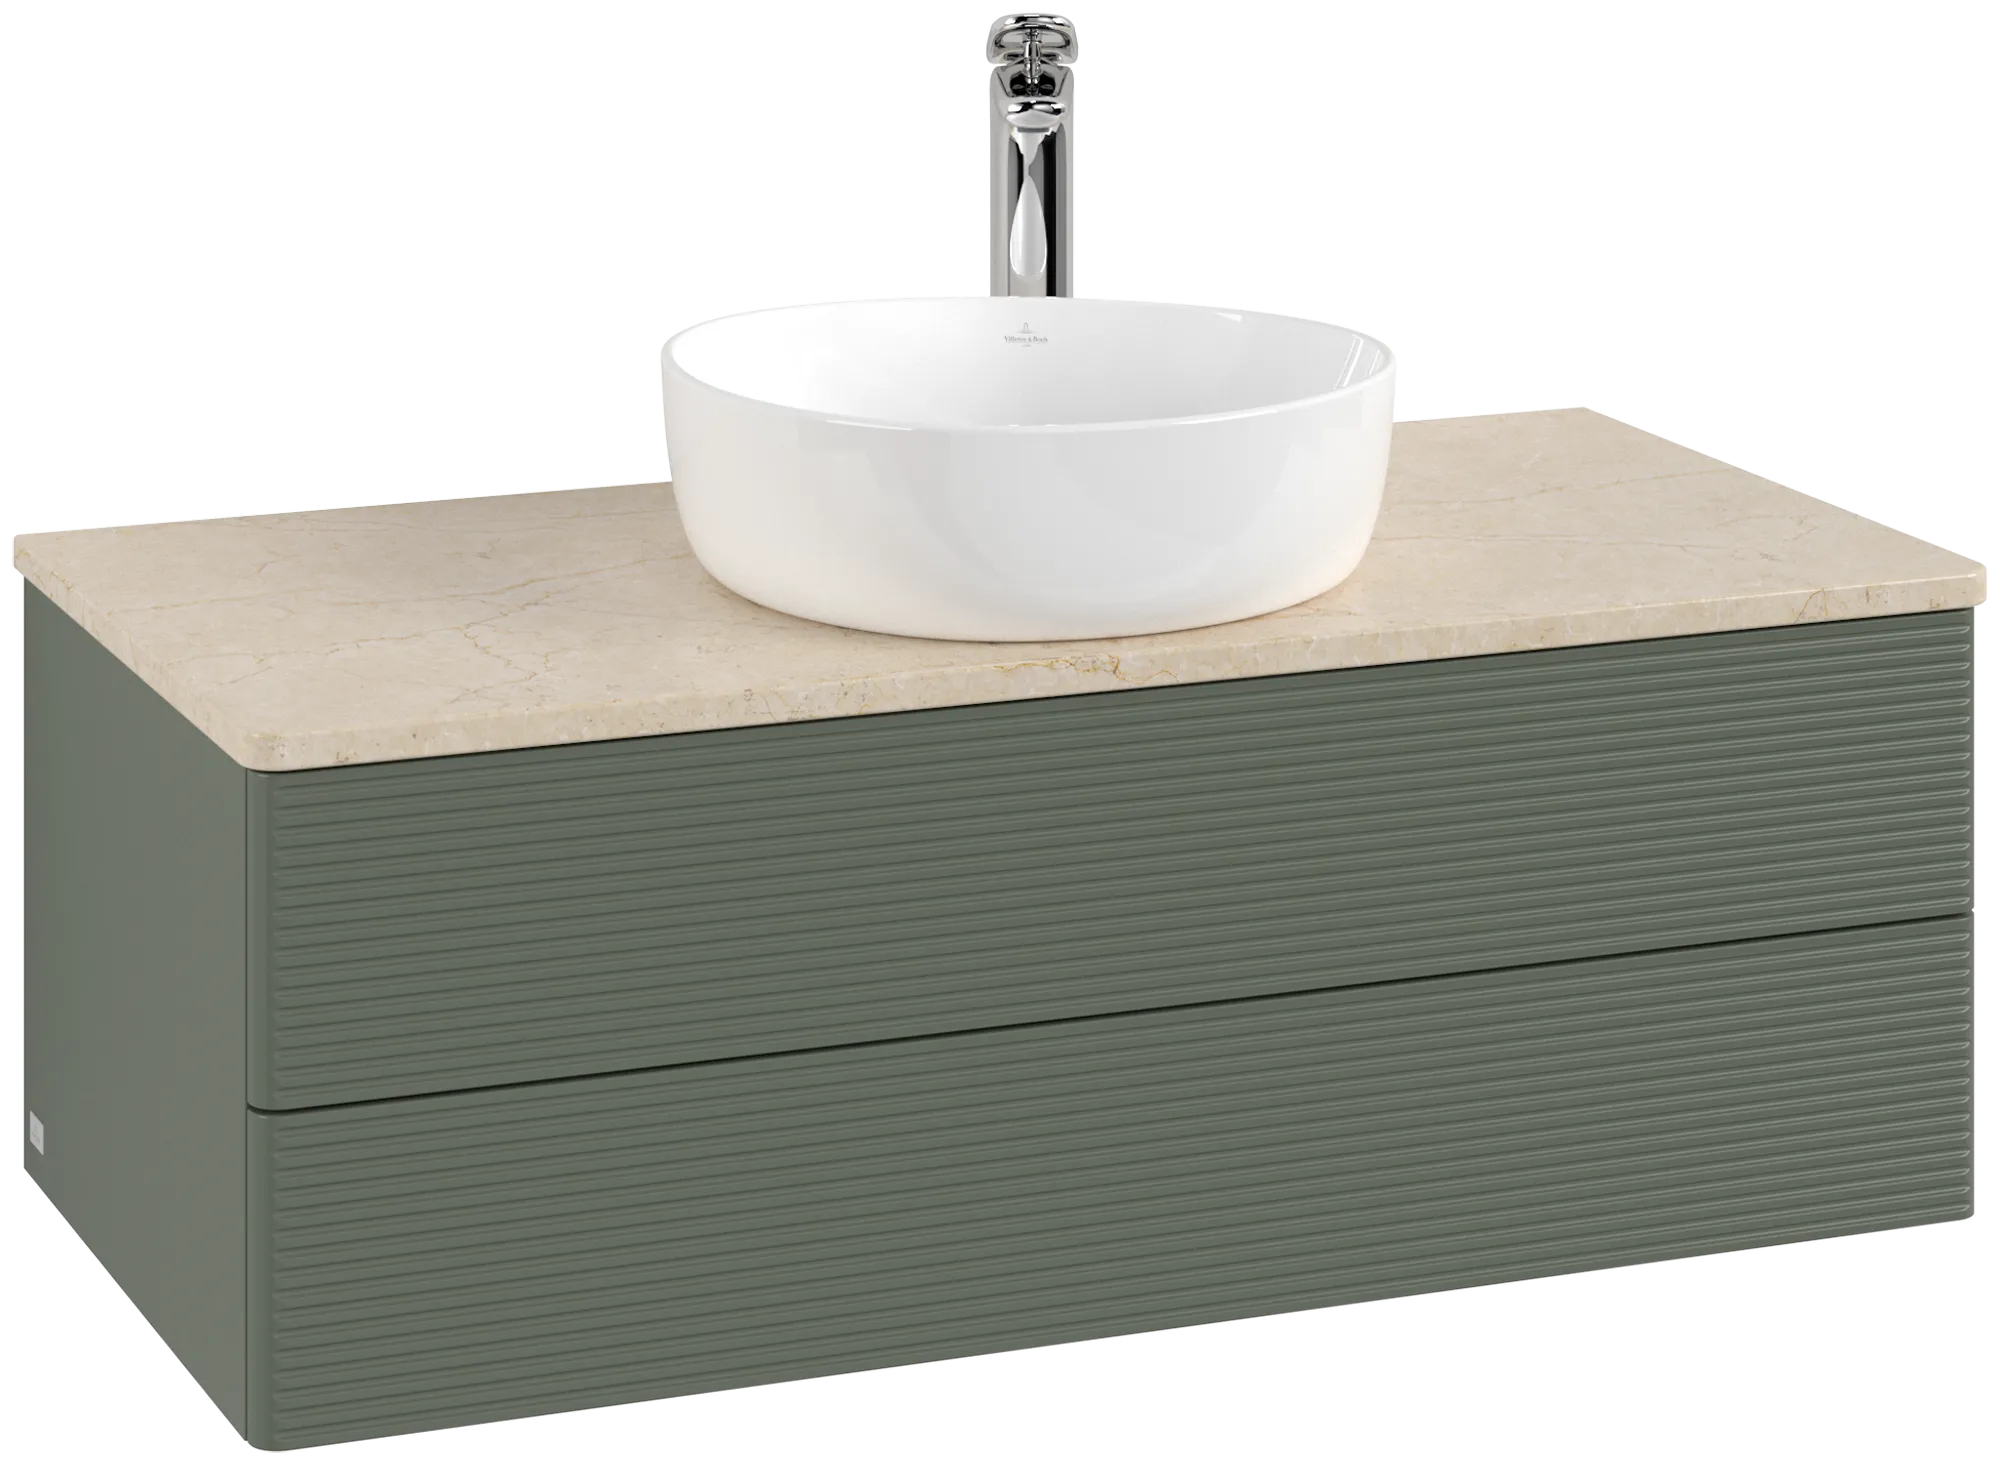 Picture of VILLEROY BOCH Antao Vanity unit, 2 pull-out compartments, 1000 x 360 x 500 mm, Front with grain texture, Leaf Green Matt Lacquer / Botticino #K20153HL